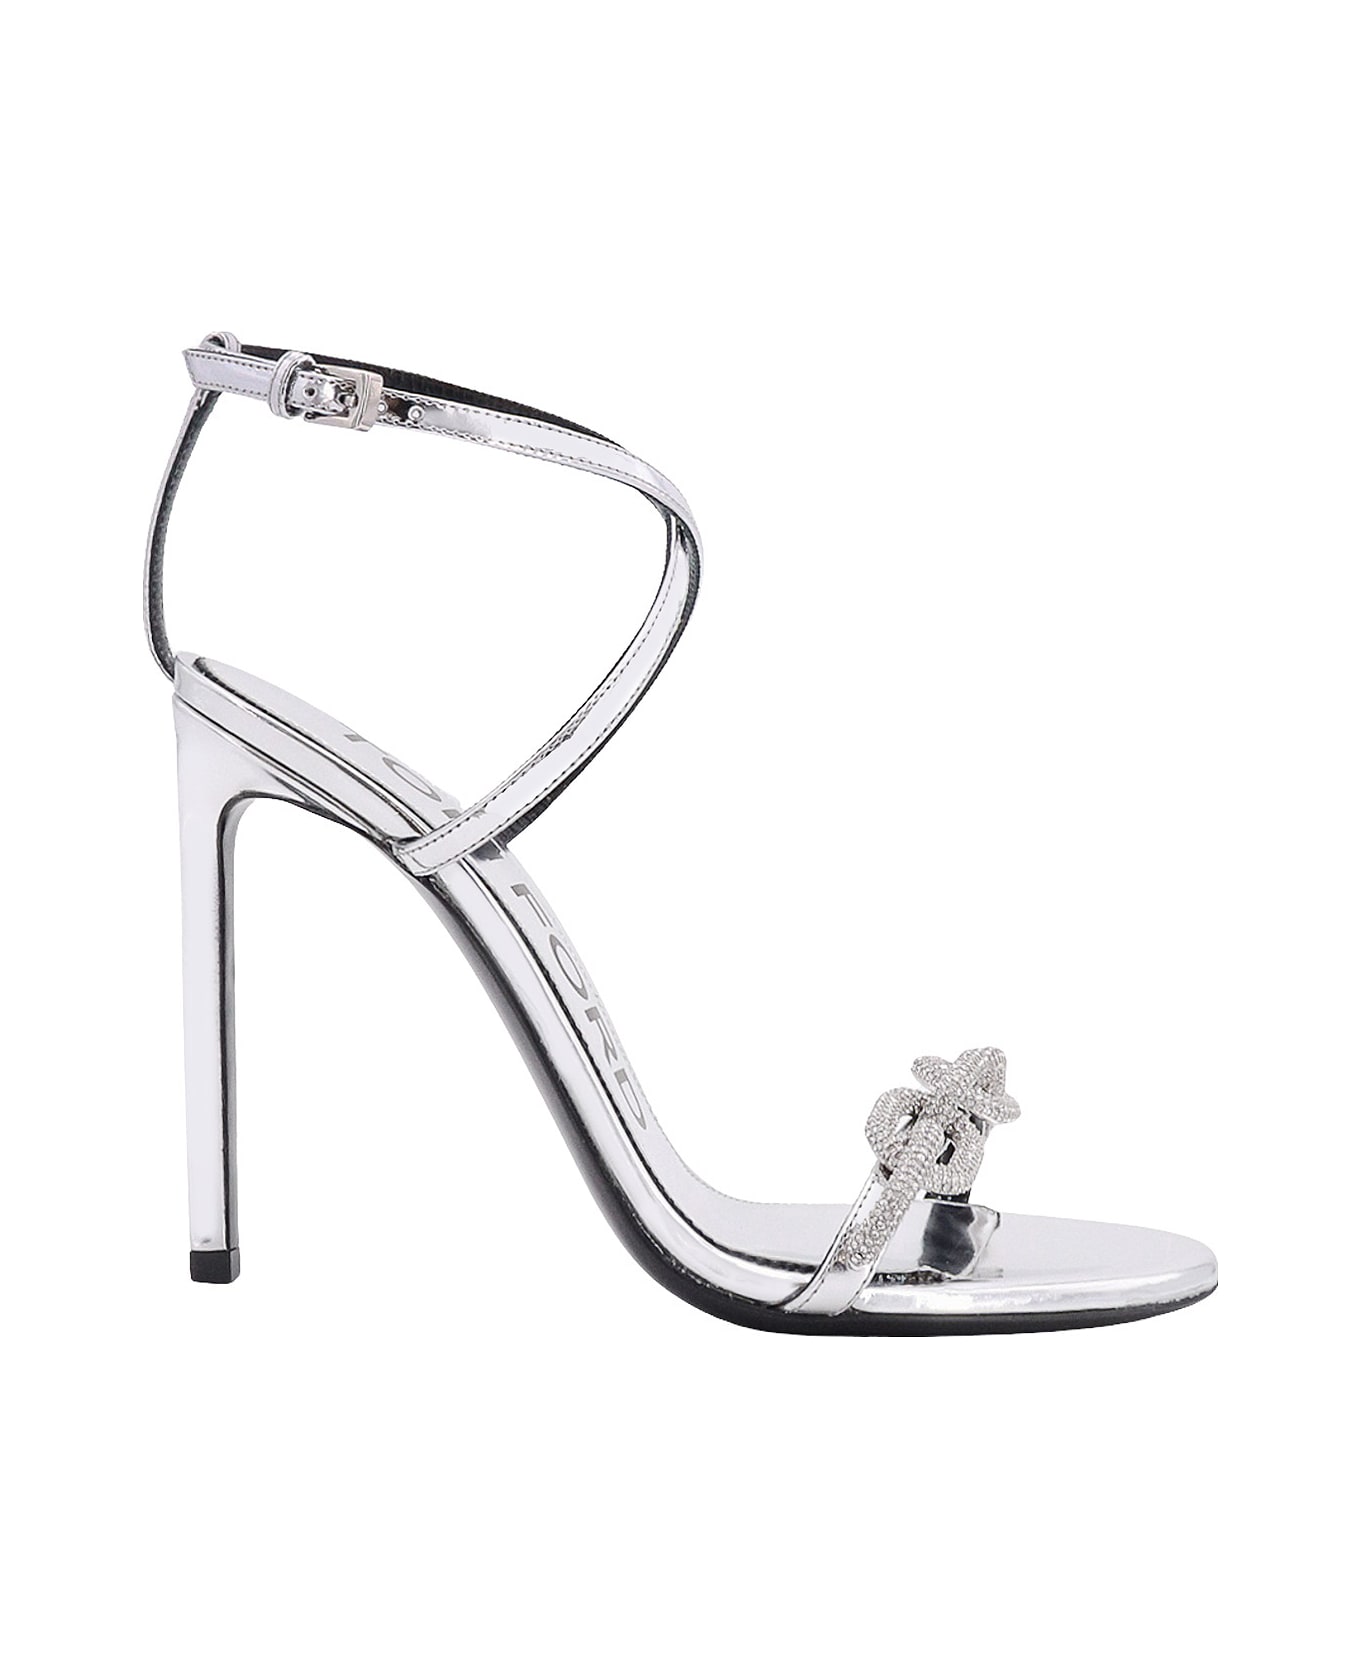 Tom Ford Sandals - Silver